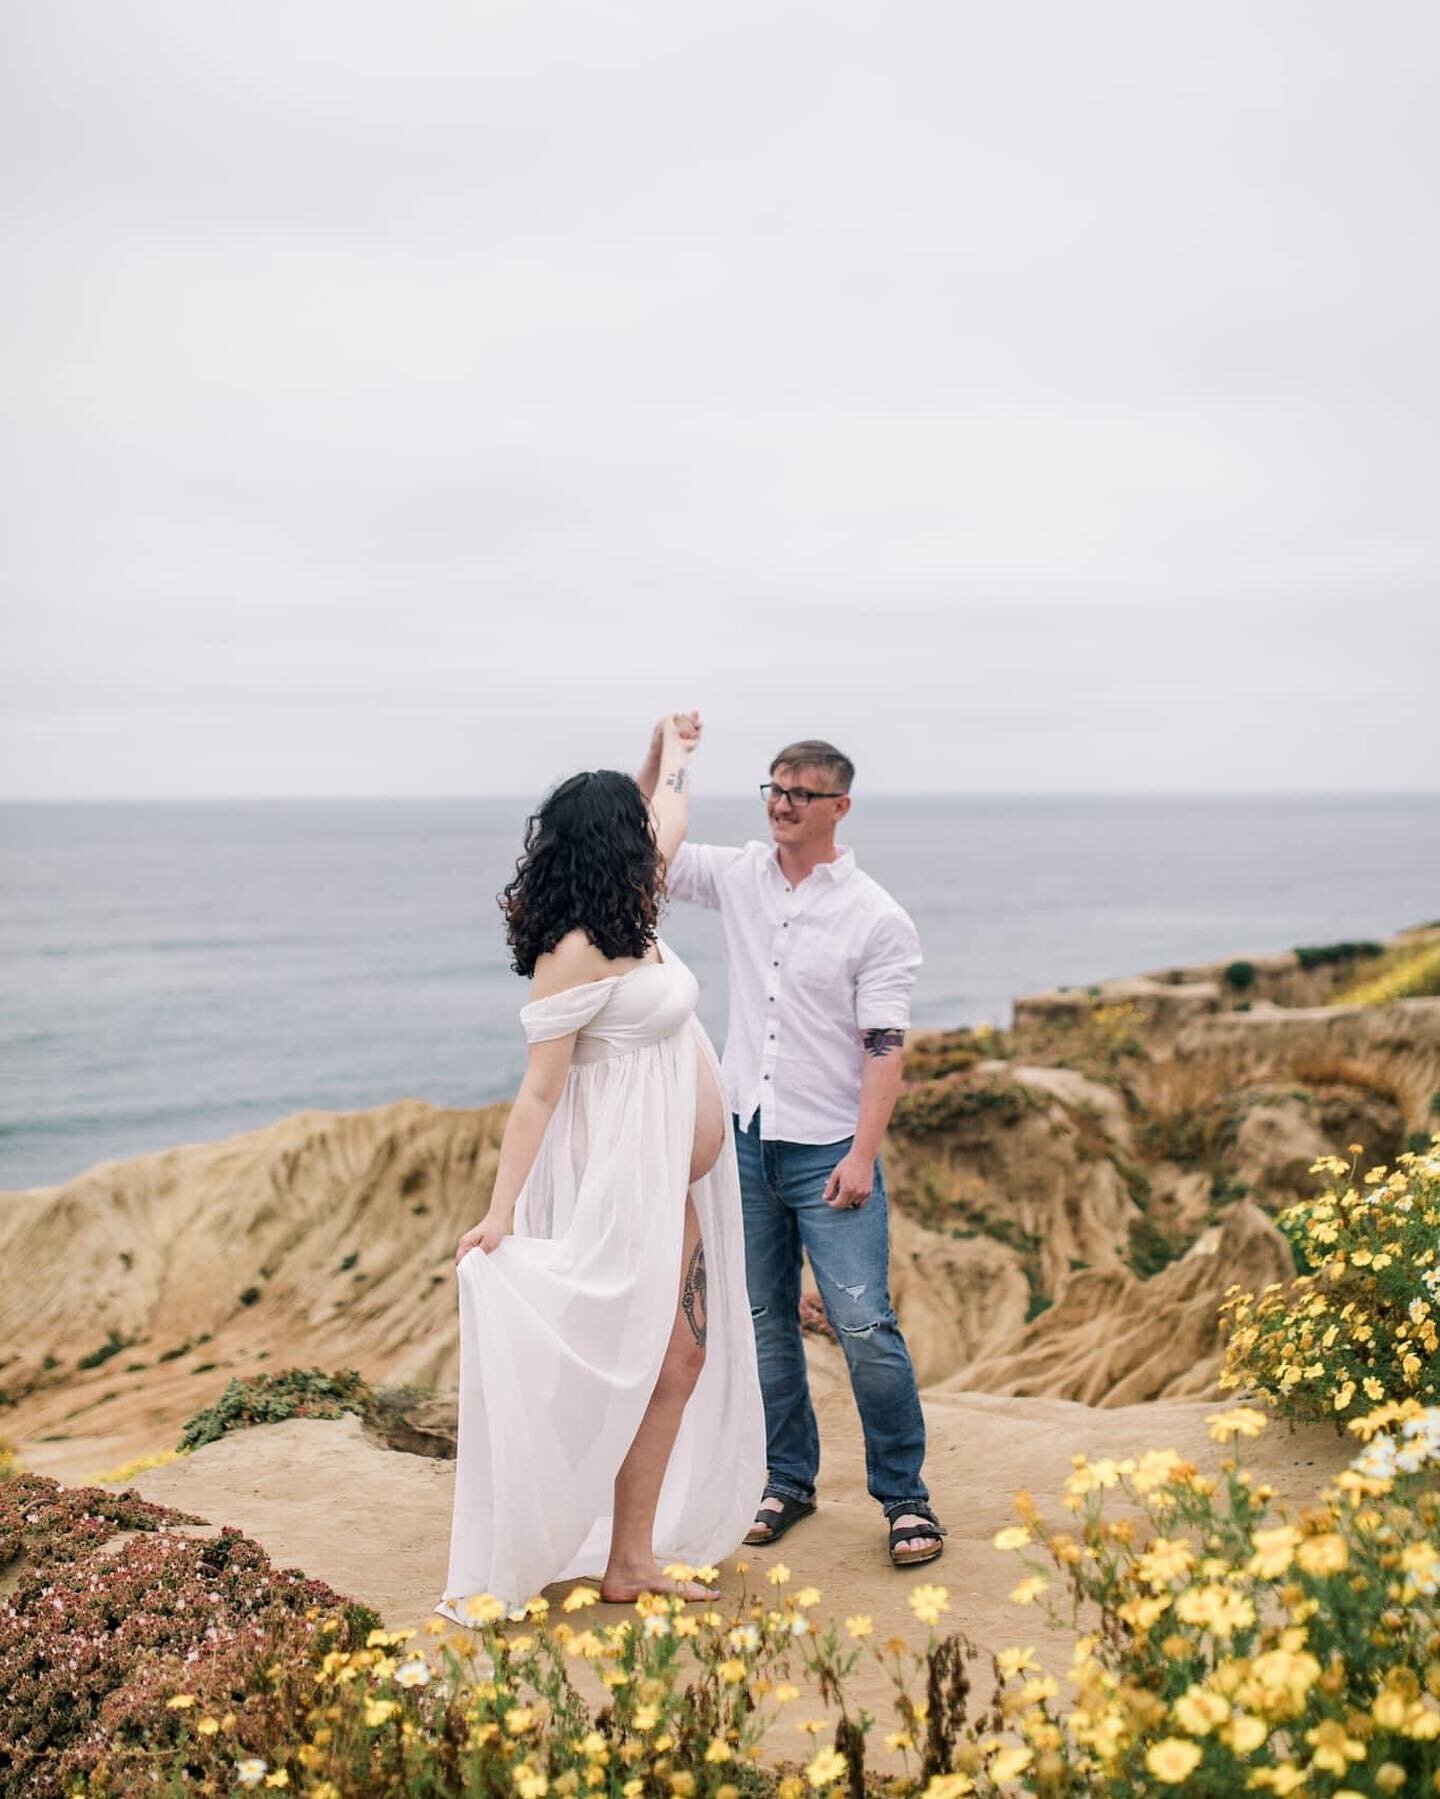 Maternity session at Sunset Cliffs? Yes, please! 😍 So thankful for such amazing, kind, fun clients who trust me to capture these special moments.